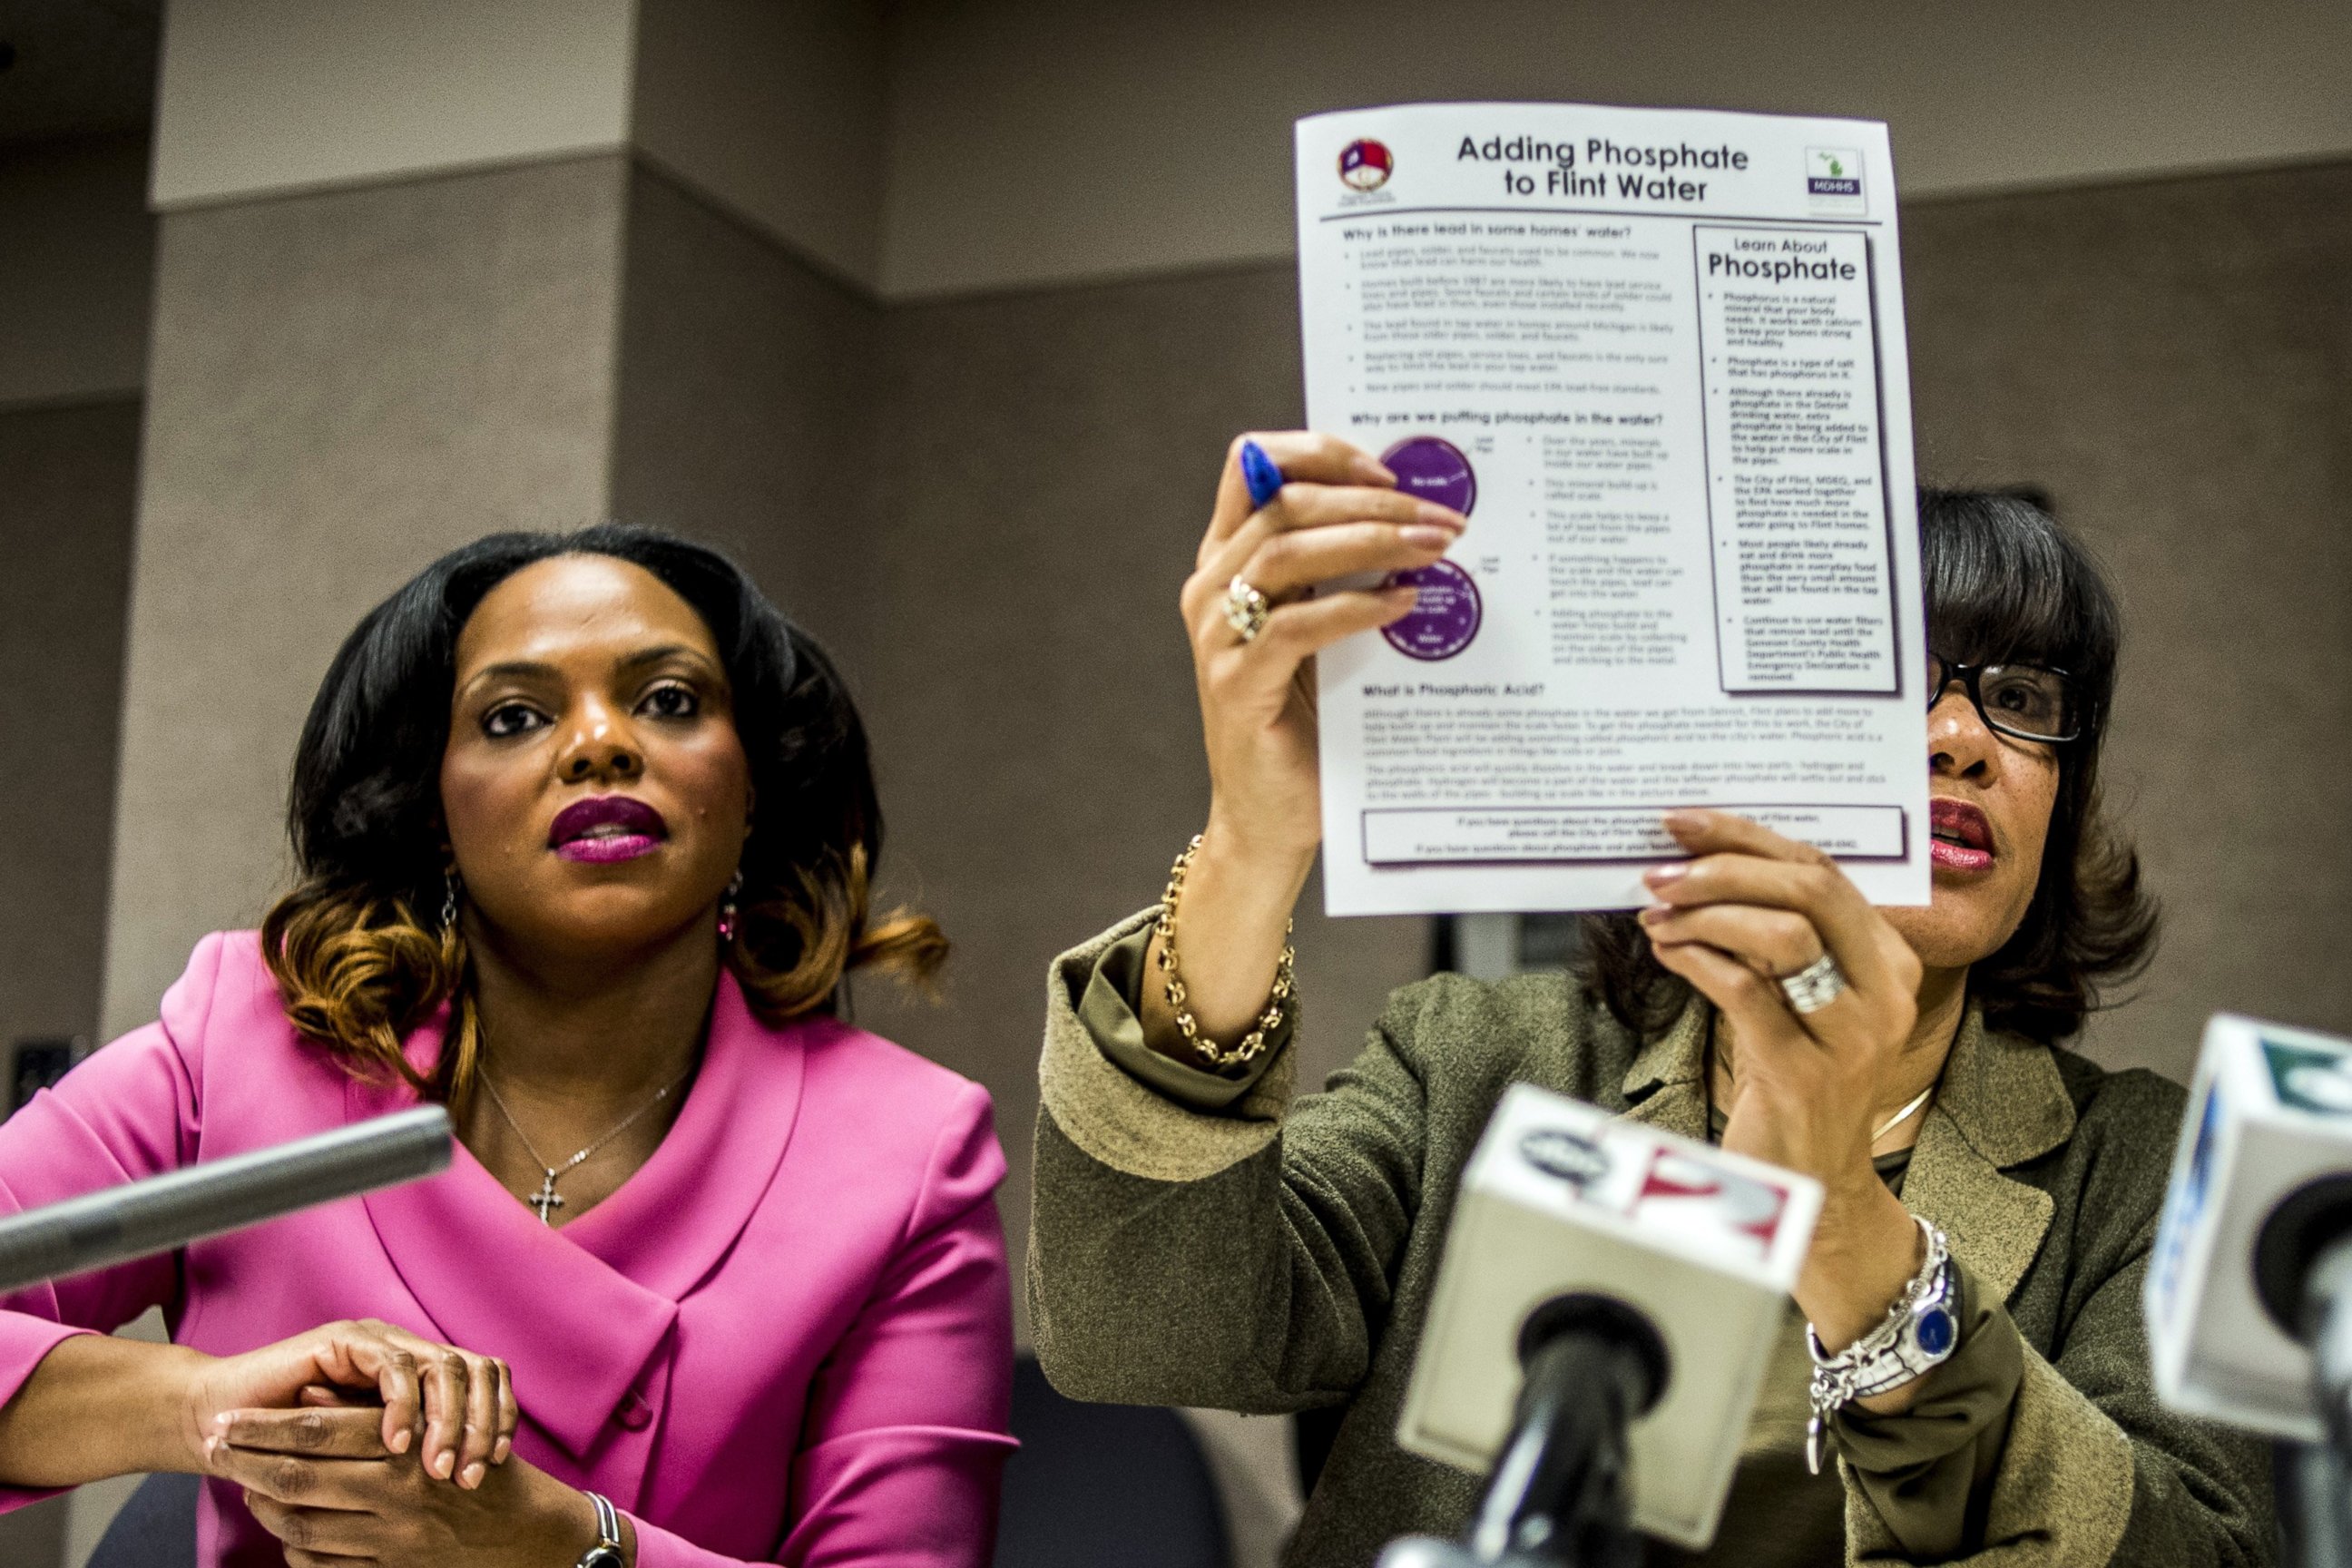 PHOTO: Flint Mayor Karen Weaver, right, and City Administrator Natasha Henderson address questions about adding supplemental phosphates to the city's water during a news conference, Dec. 10, 2015 at City Hall in Flint, Mich. 